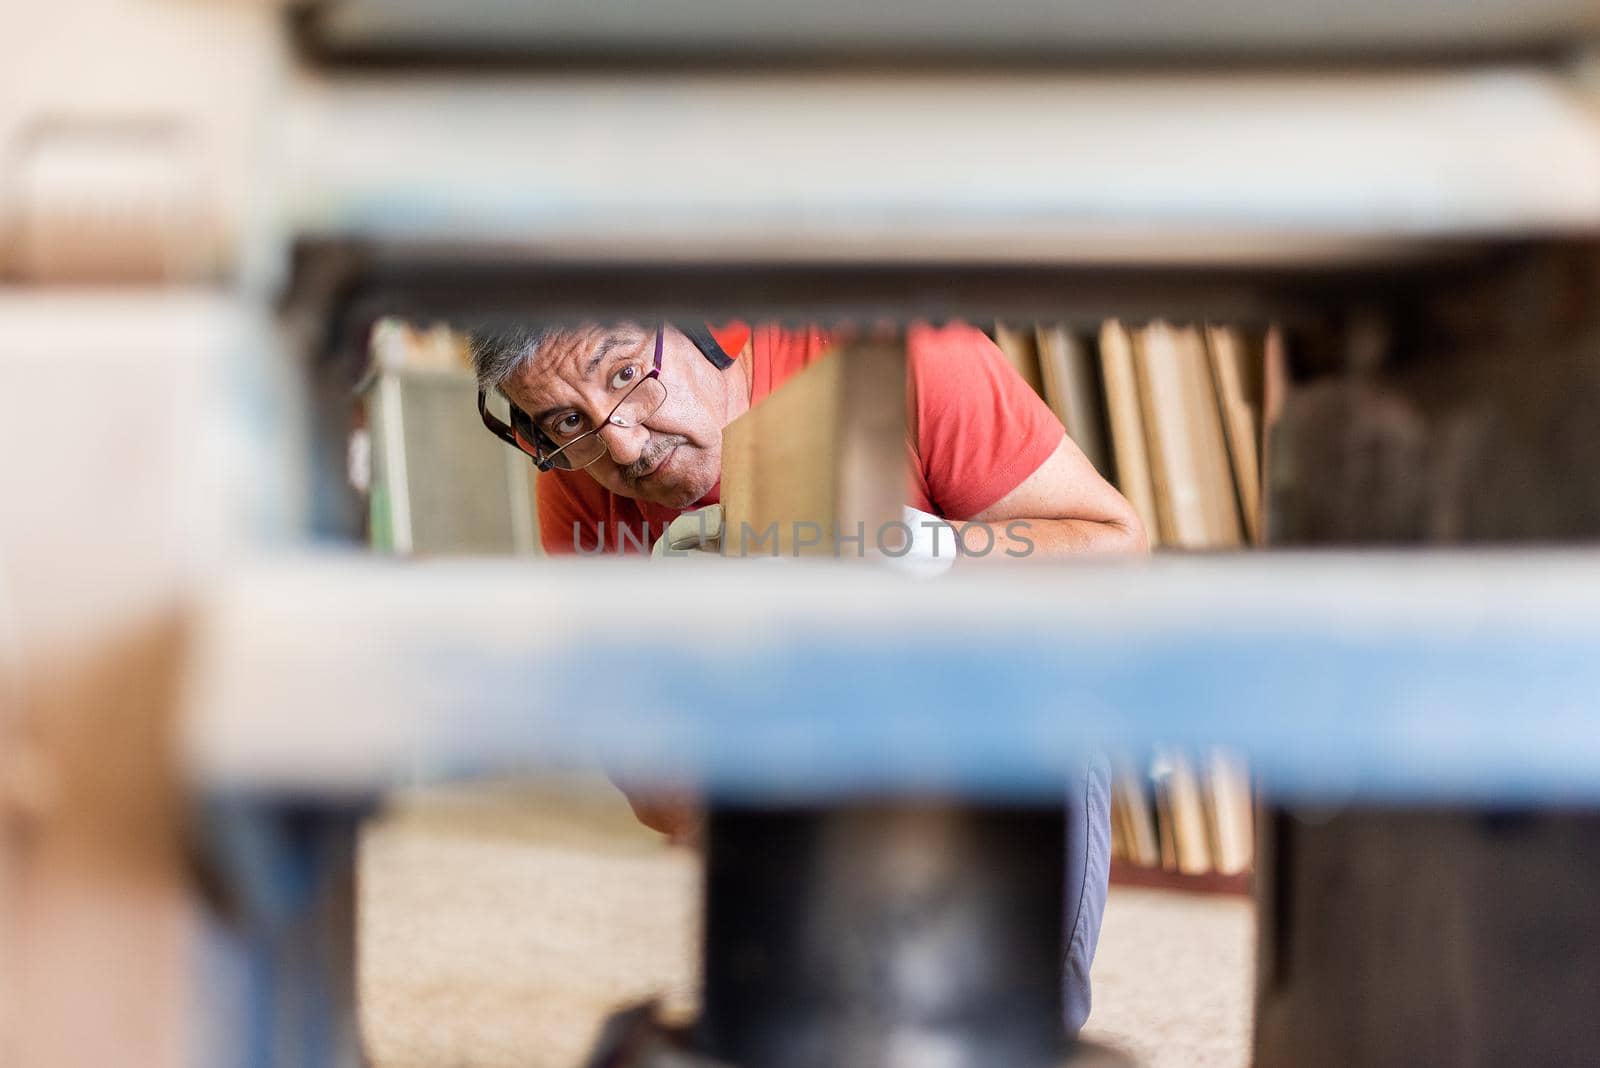 Male in red T-shirt working with a wood planer by ivanmoreno